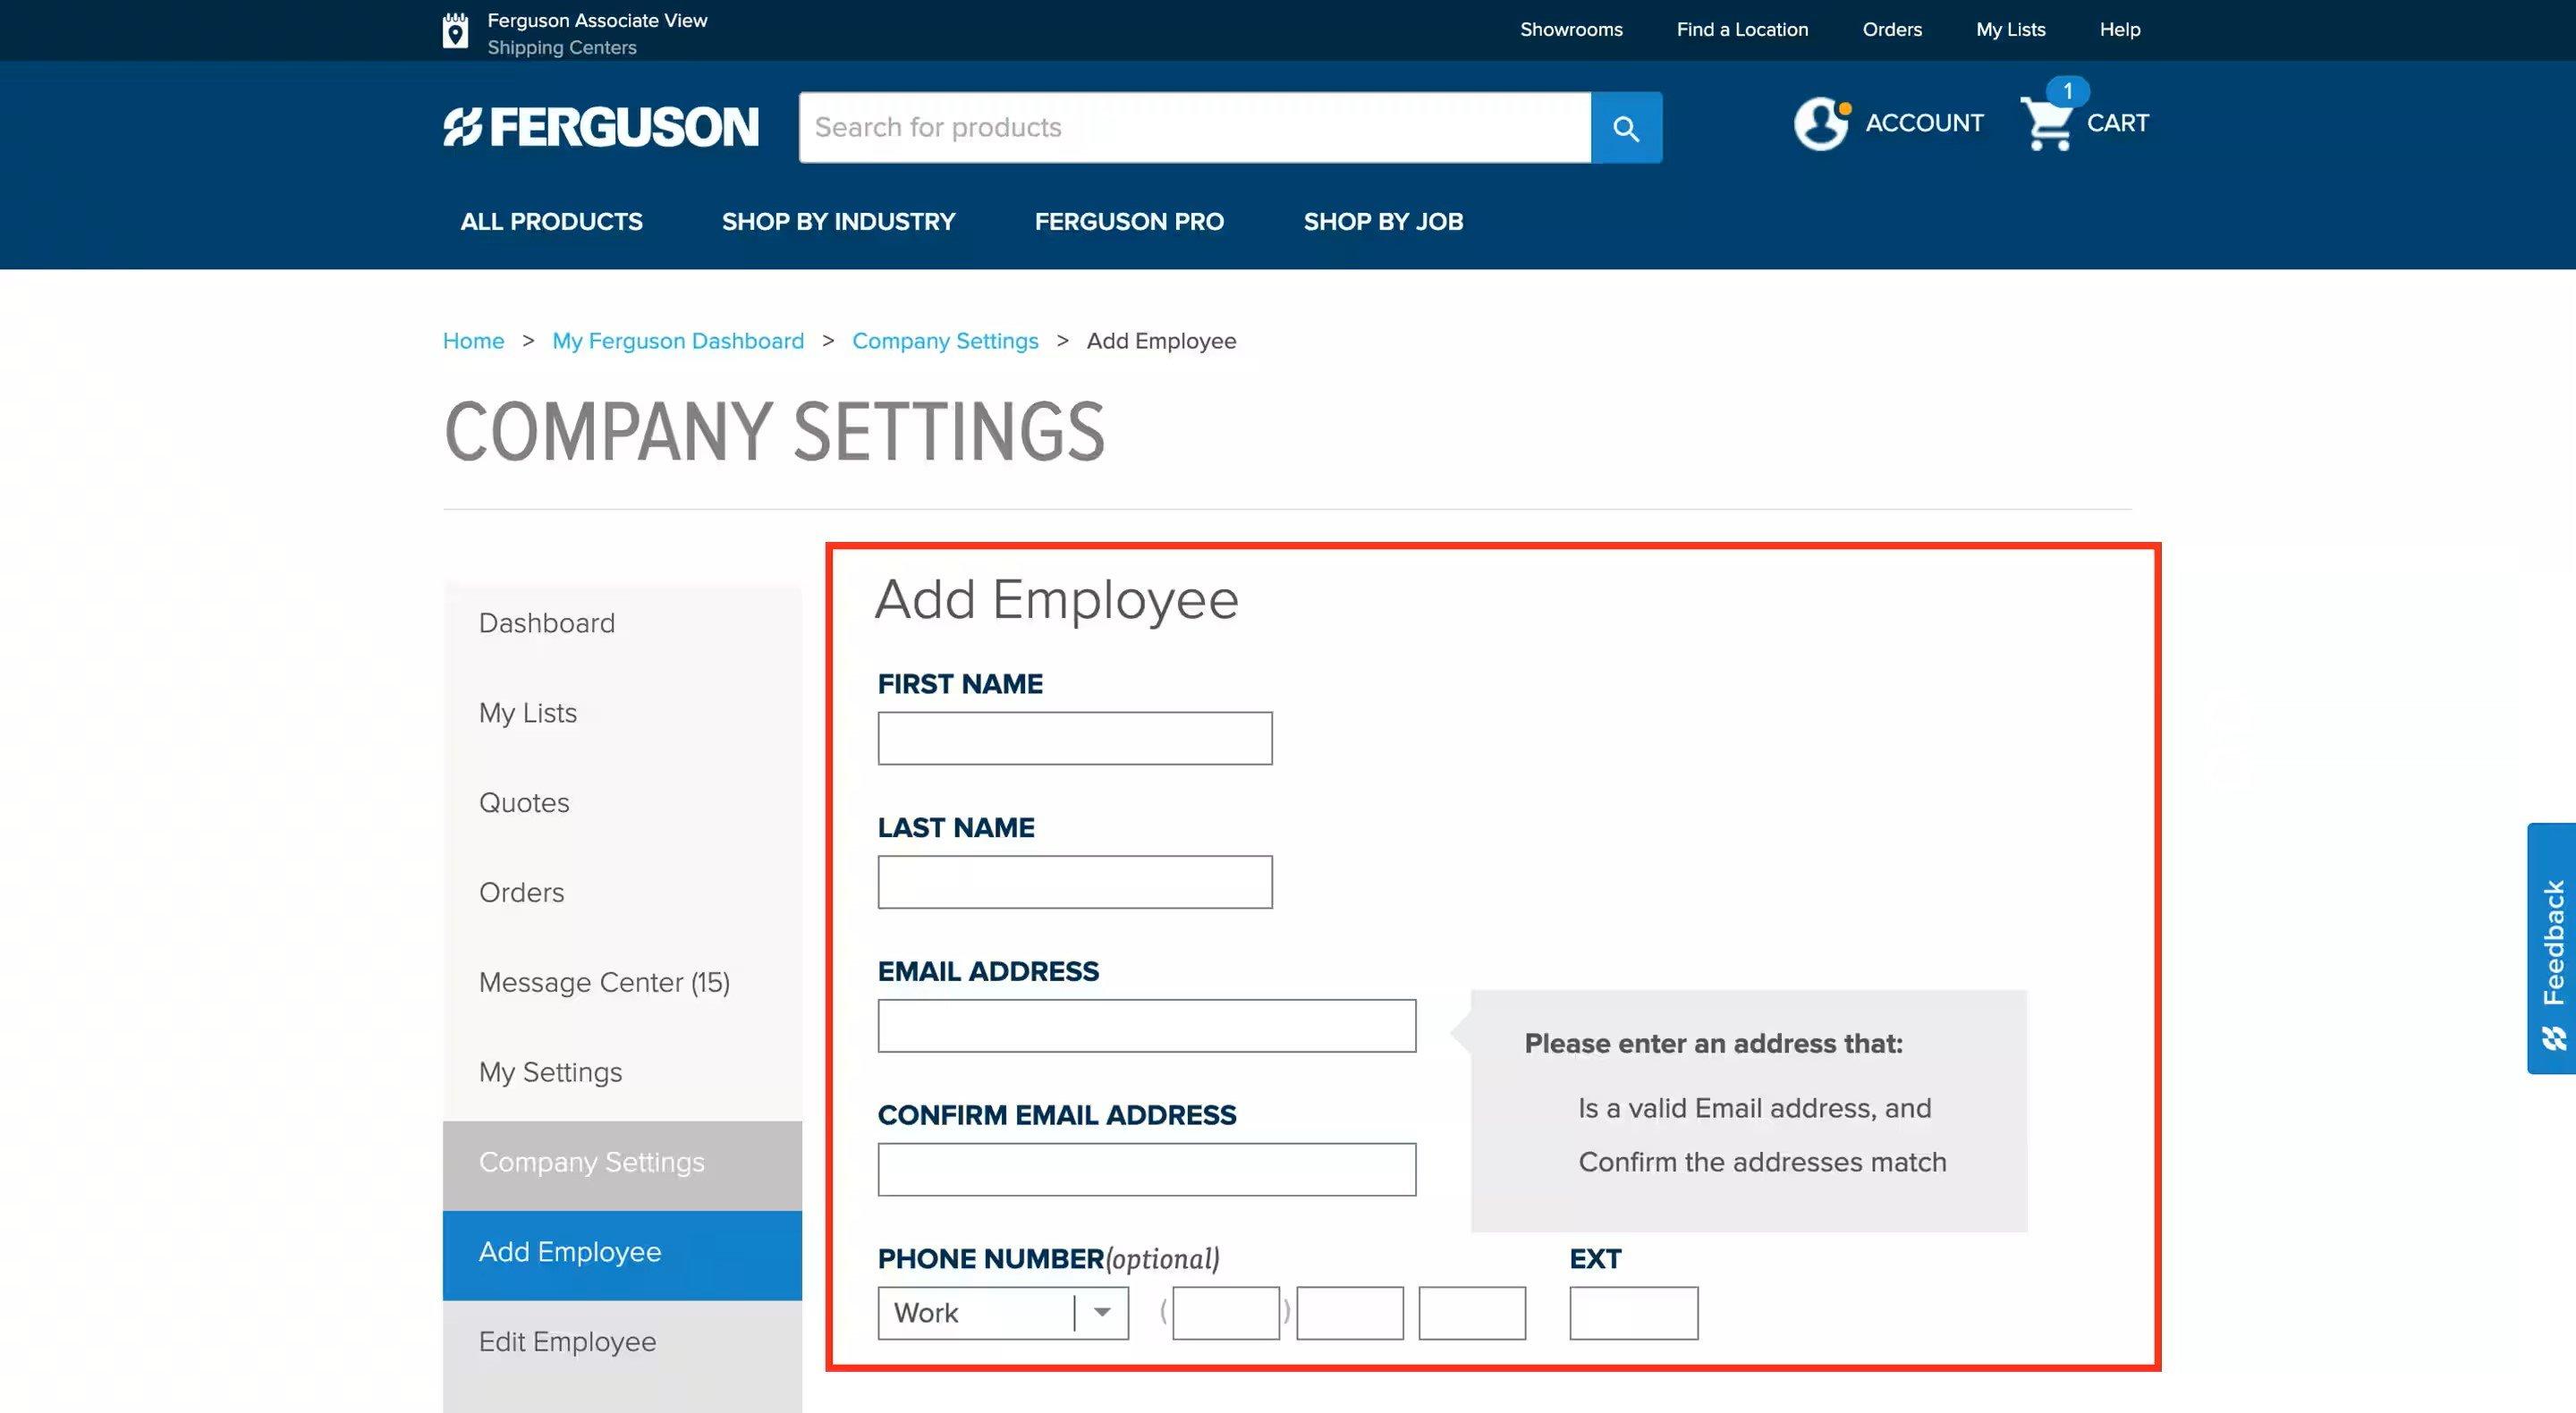 Screenshot of Add Employee Page on ferguson.com, with form fields outlined in red.